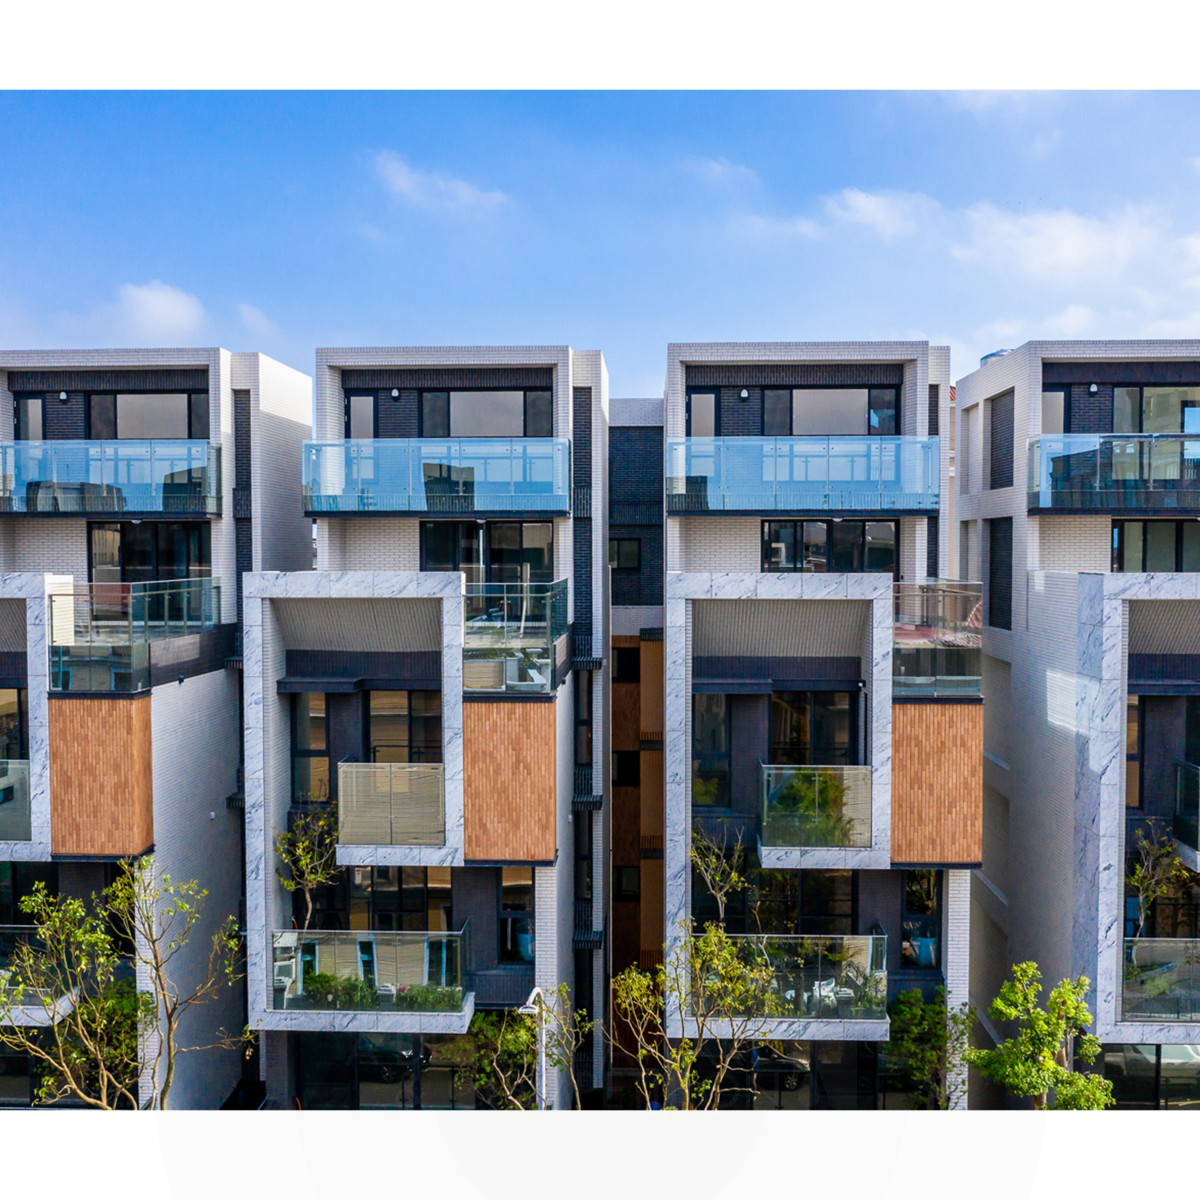 ZIZU ARKI Development and Construction wins Bronze at the prestigious A' Architecture, Building and Structure Design Award with Splendid View Residence Building.